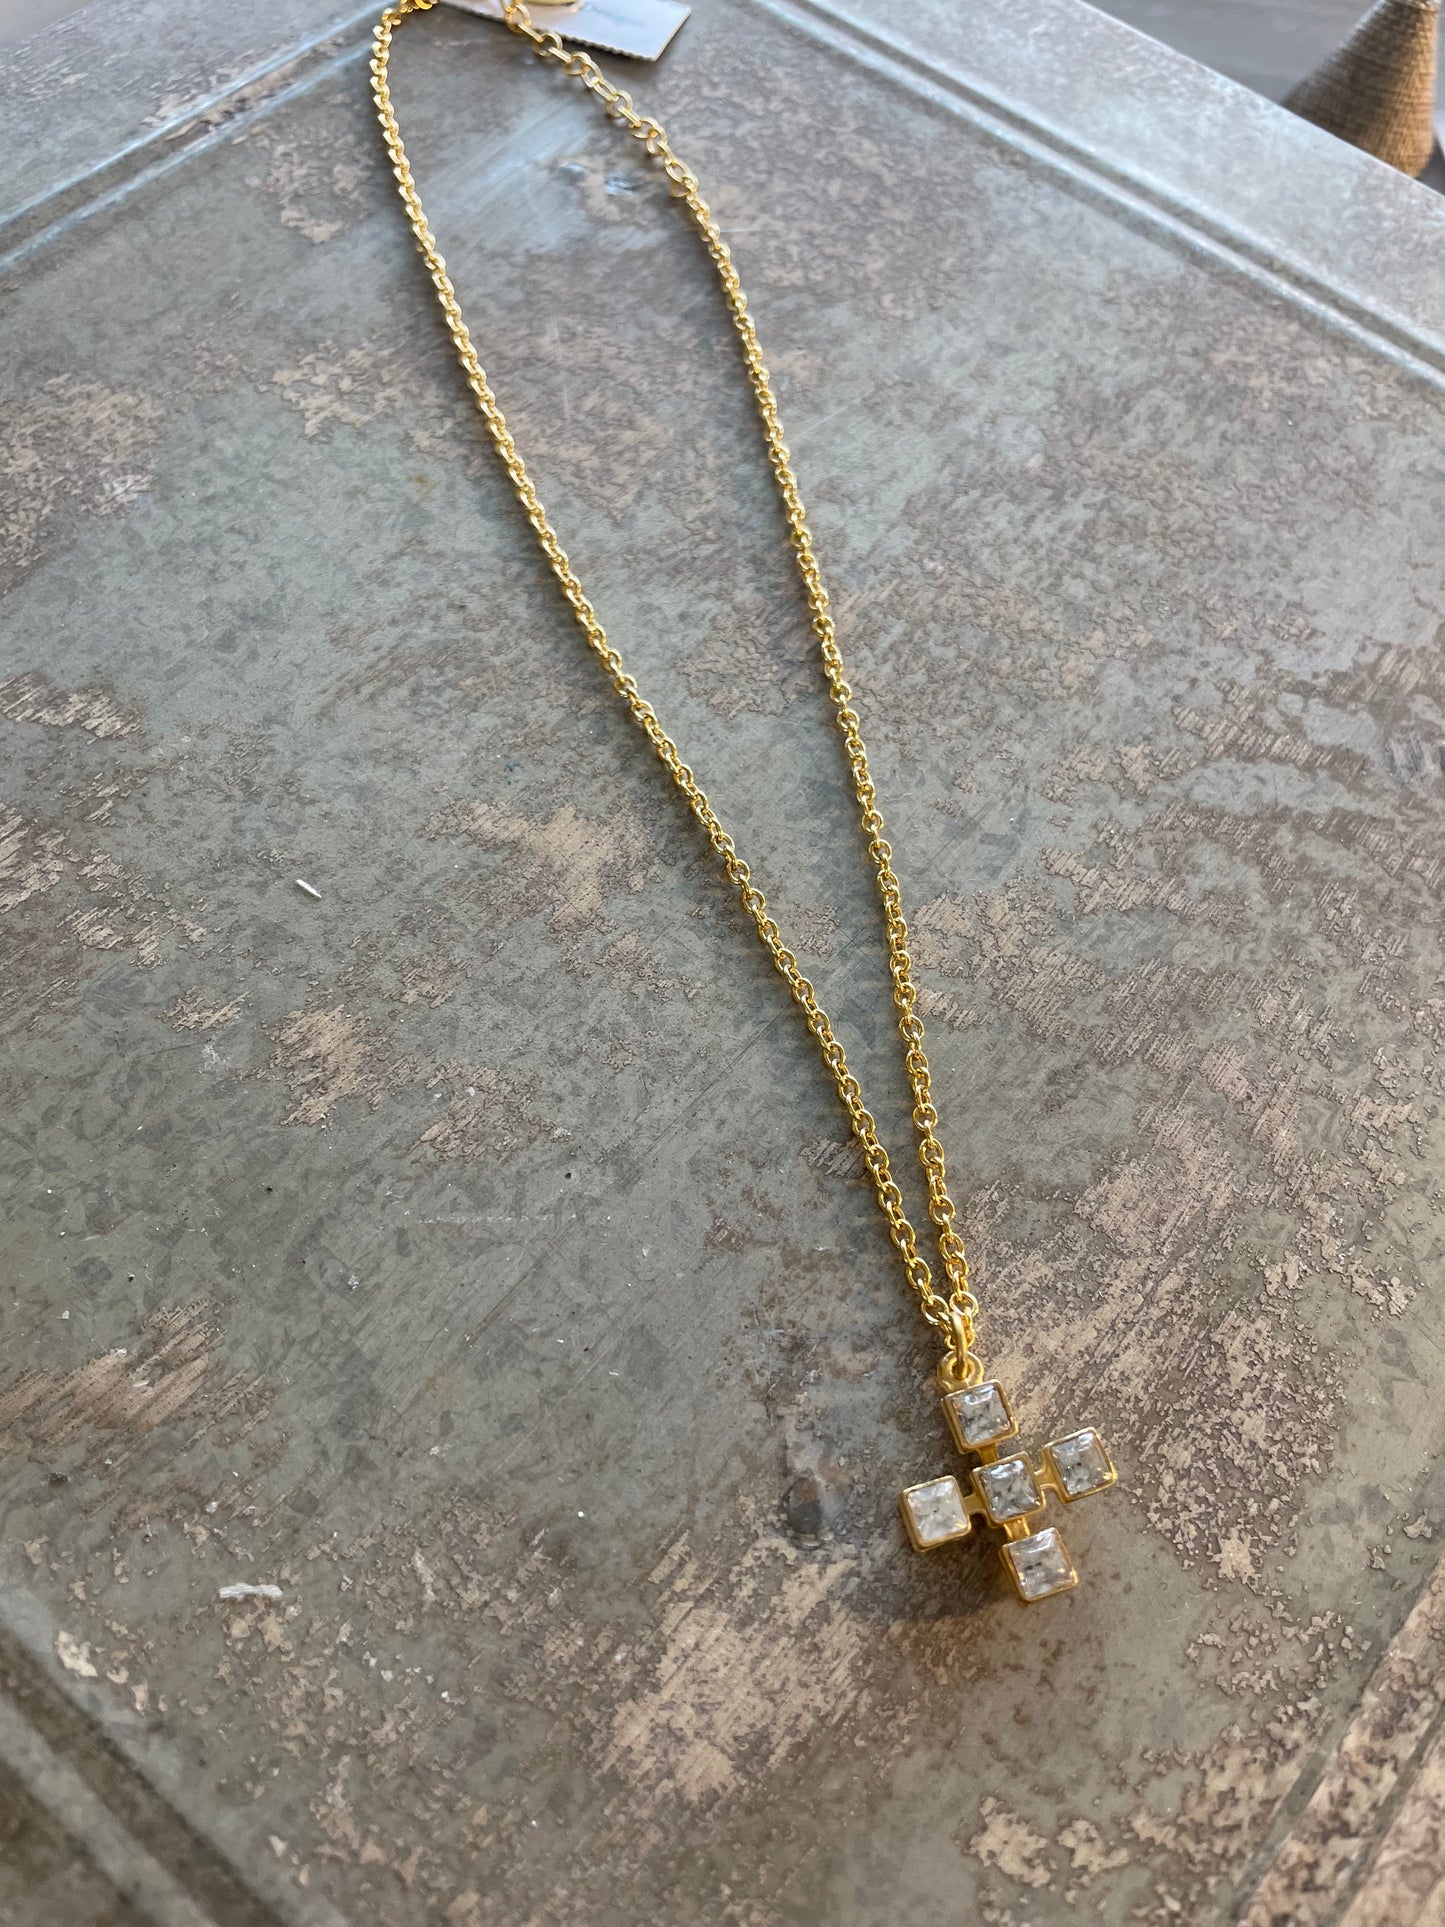 Small CZ Cross Necklace